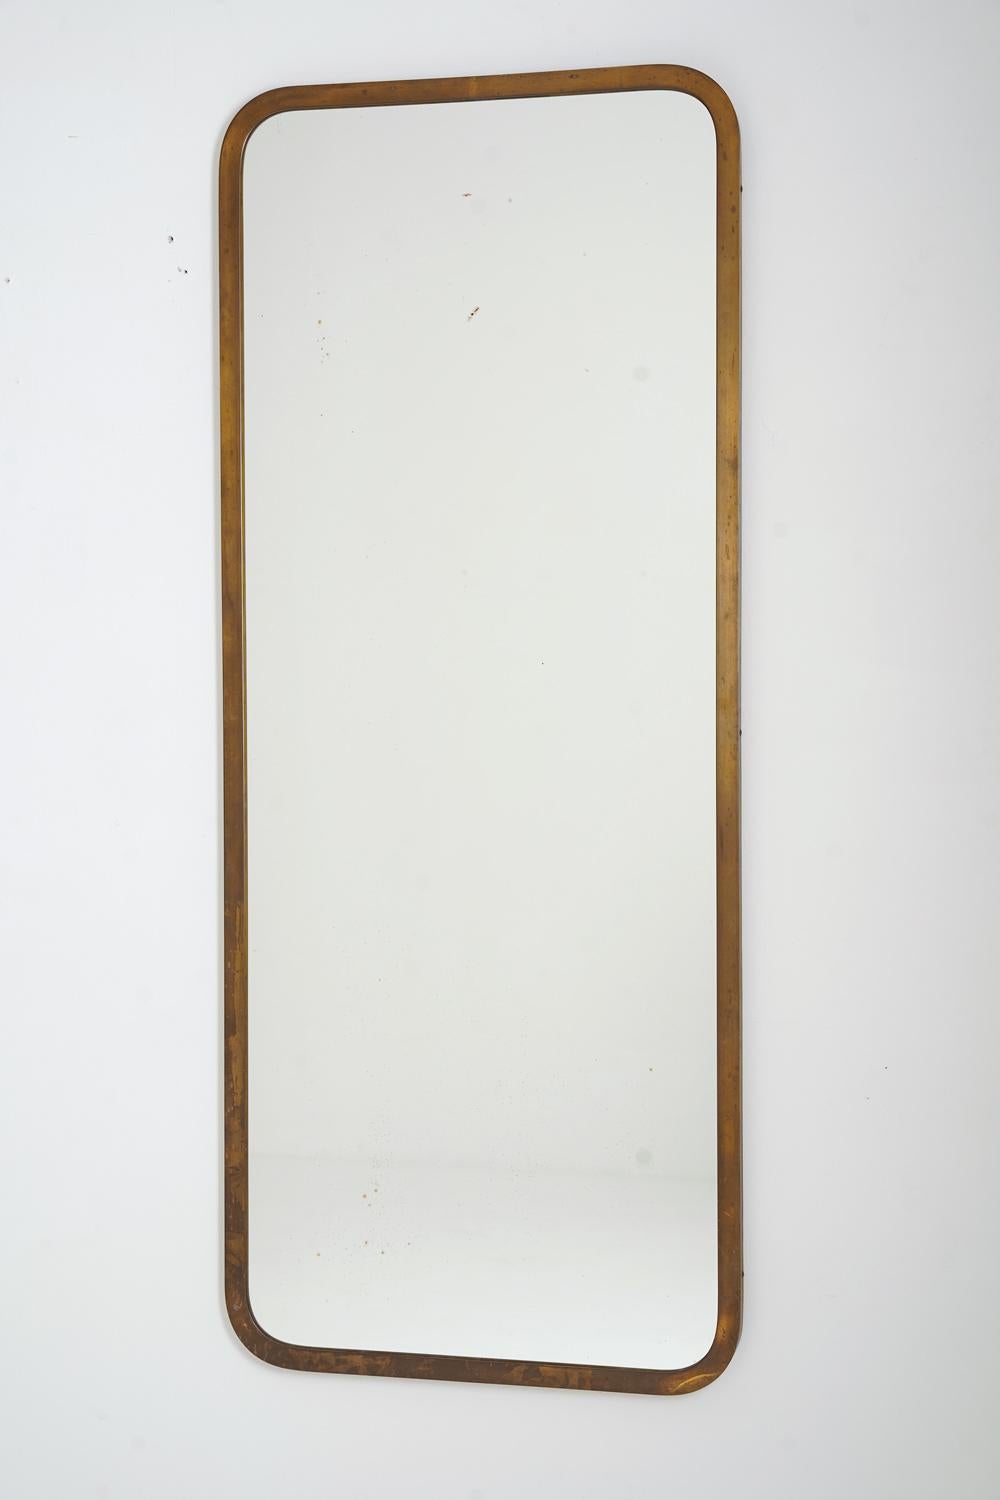 A beautiful modernist mirror produced by Nordiska Kompaniet (NK), circa 1950.
The design is simple and expresses a low key elegance, typical for the Swedish Modern design era.

Condition: Very good condition with perfect patina on the brass. Signs